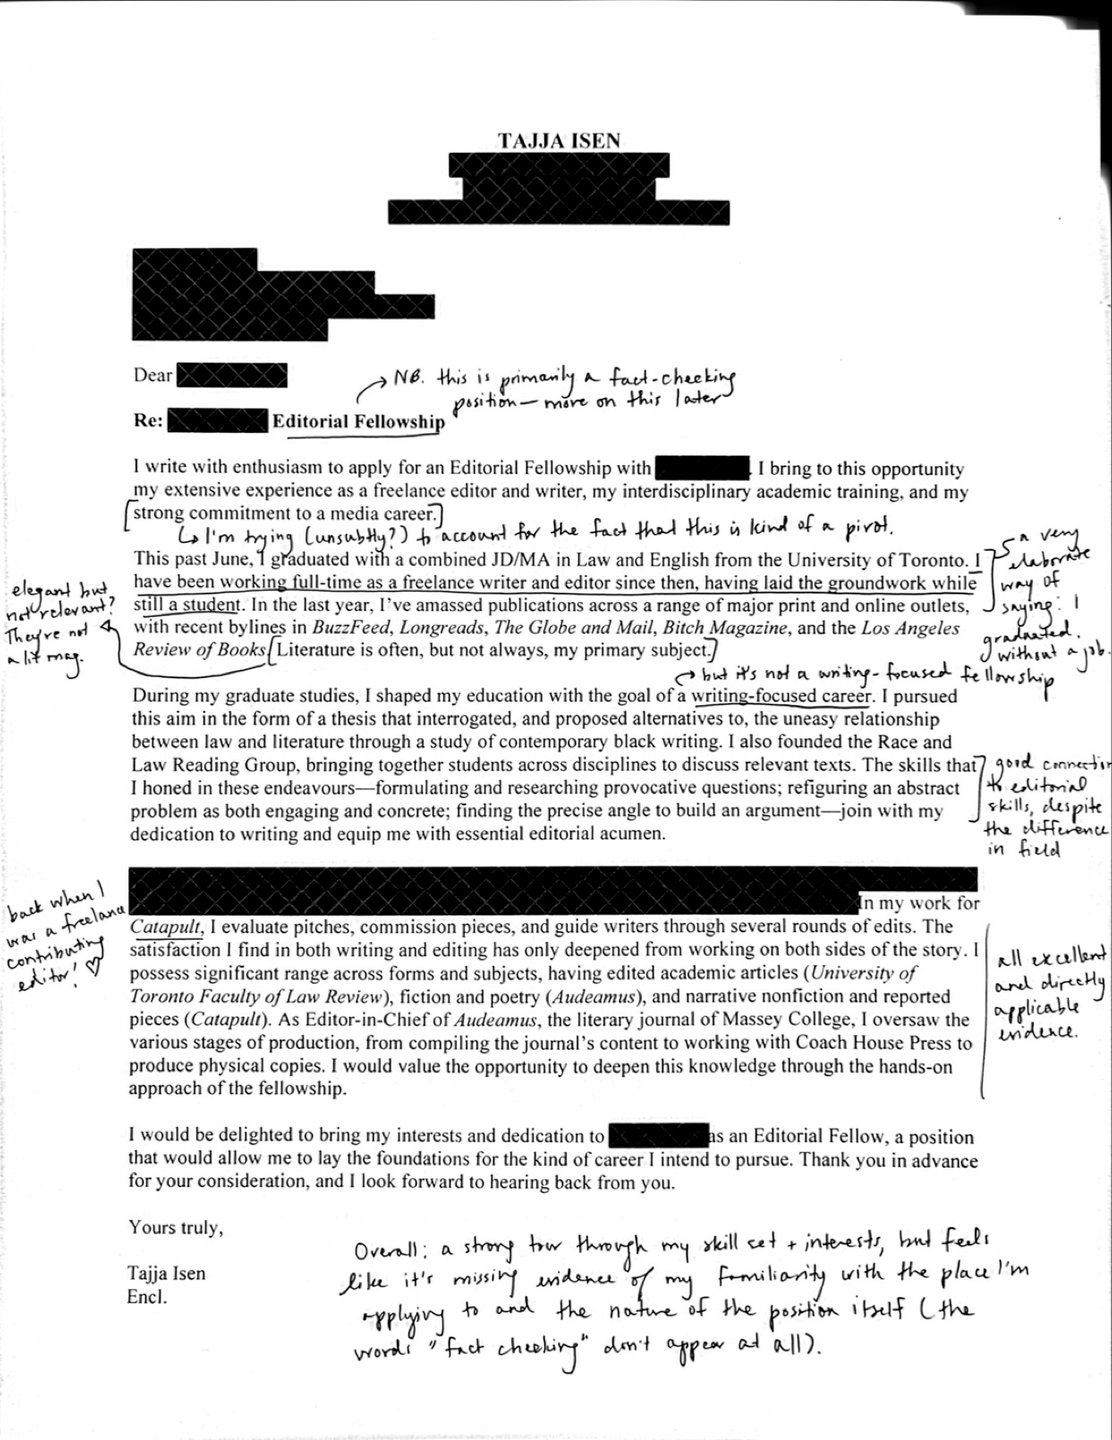 The document is a cover letter submitted for an editorial fellowship role at an unspecified general-interest magazine (the name of the magazine has been redacted from the letter). The letter describes the applicant's educational history, graduate education, and editorial experience. The typed letter has been annotated by the applicant in black ink, highlighting the aspects of the letter that provide strong evidence for skills relevant to the position and highlighting the ones that do not, and offering an overall assessment of the letter's effectiveness.